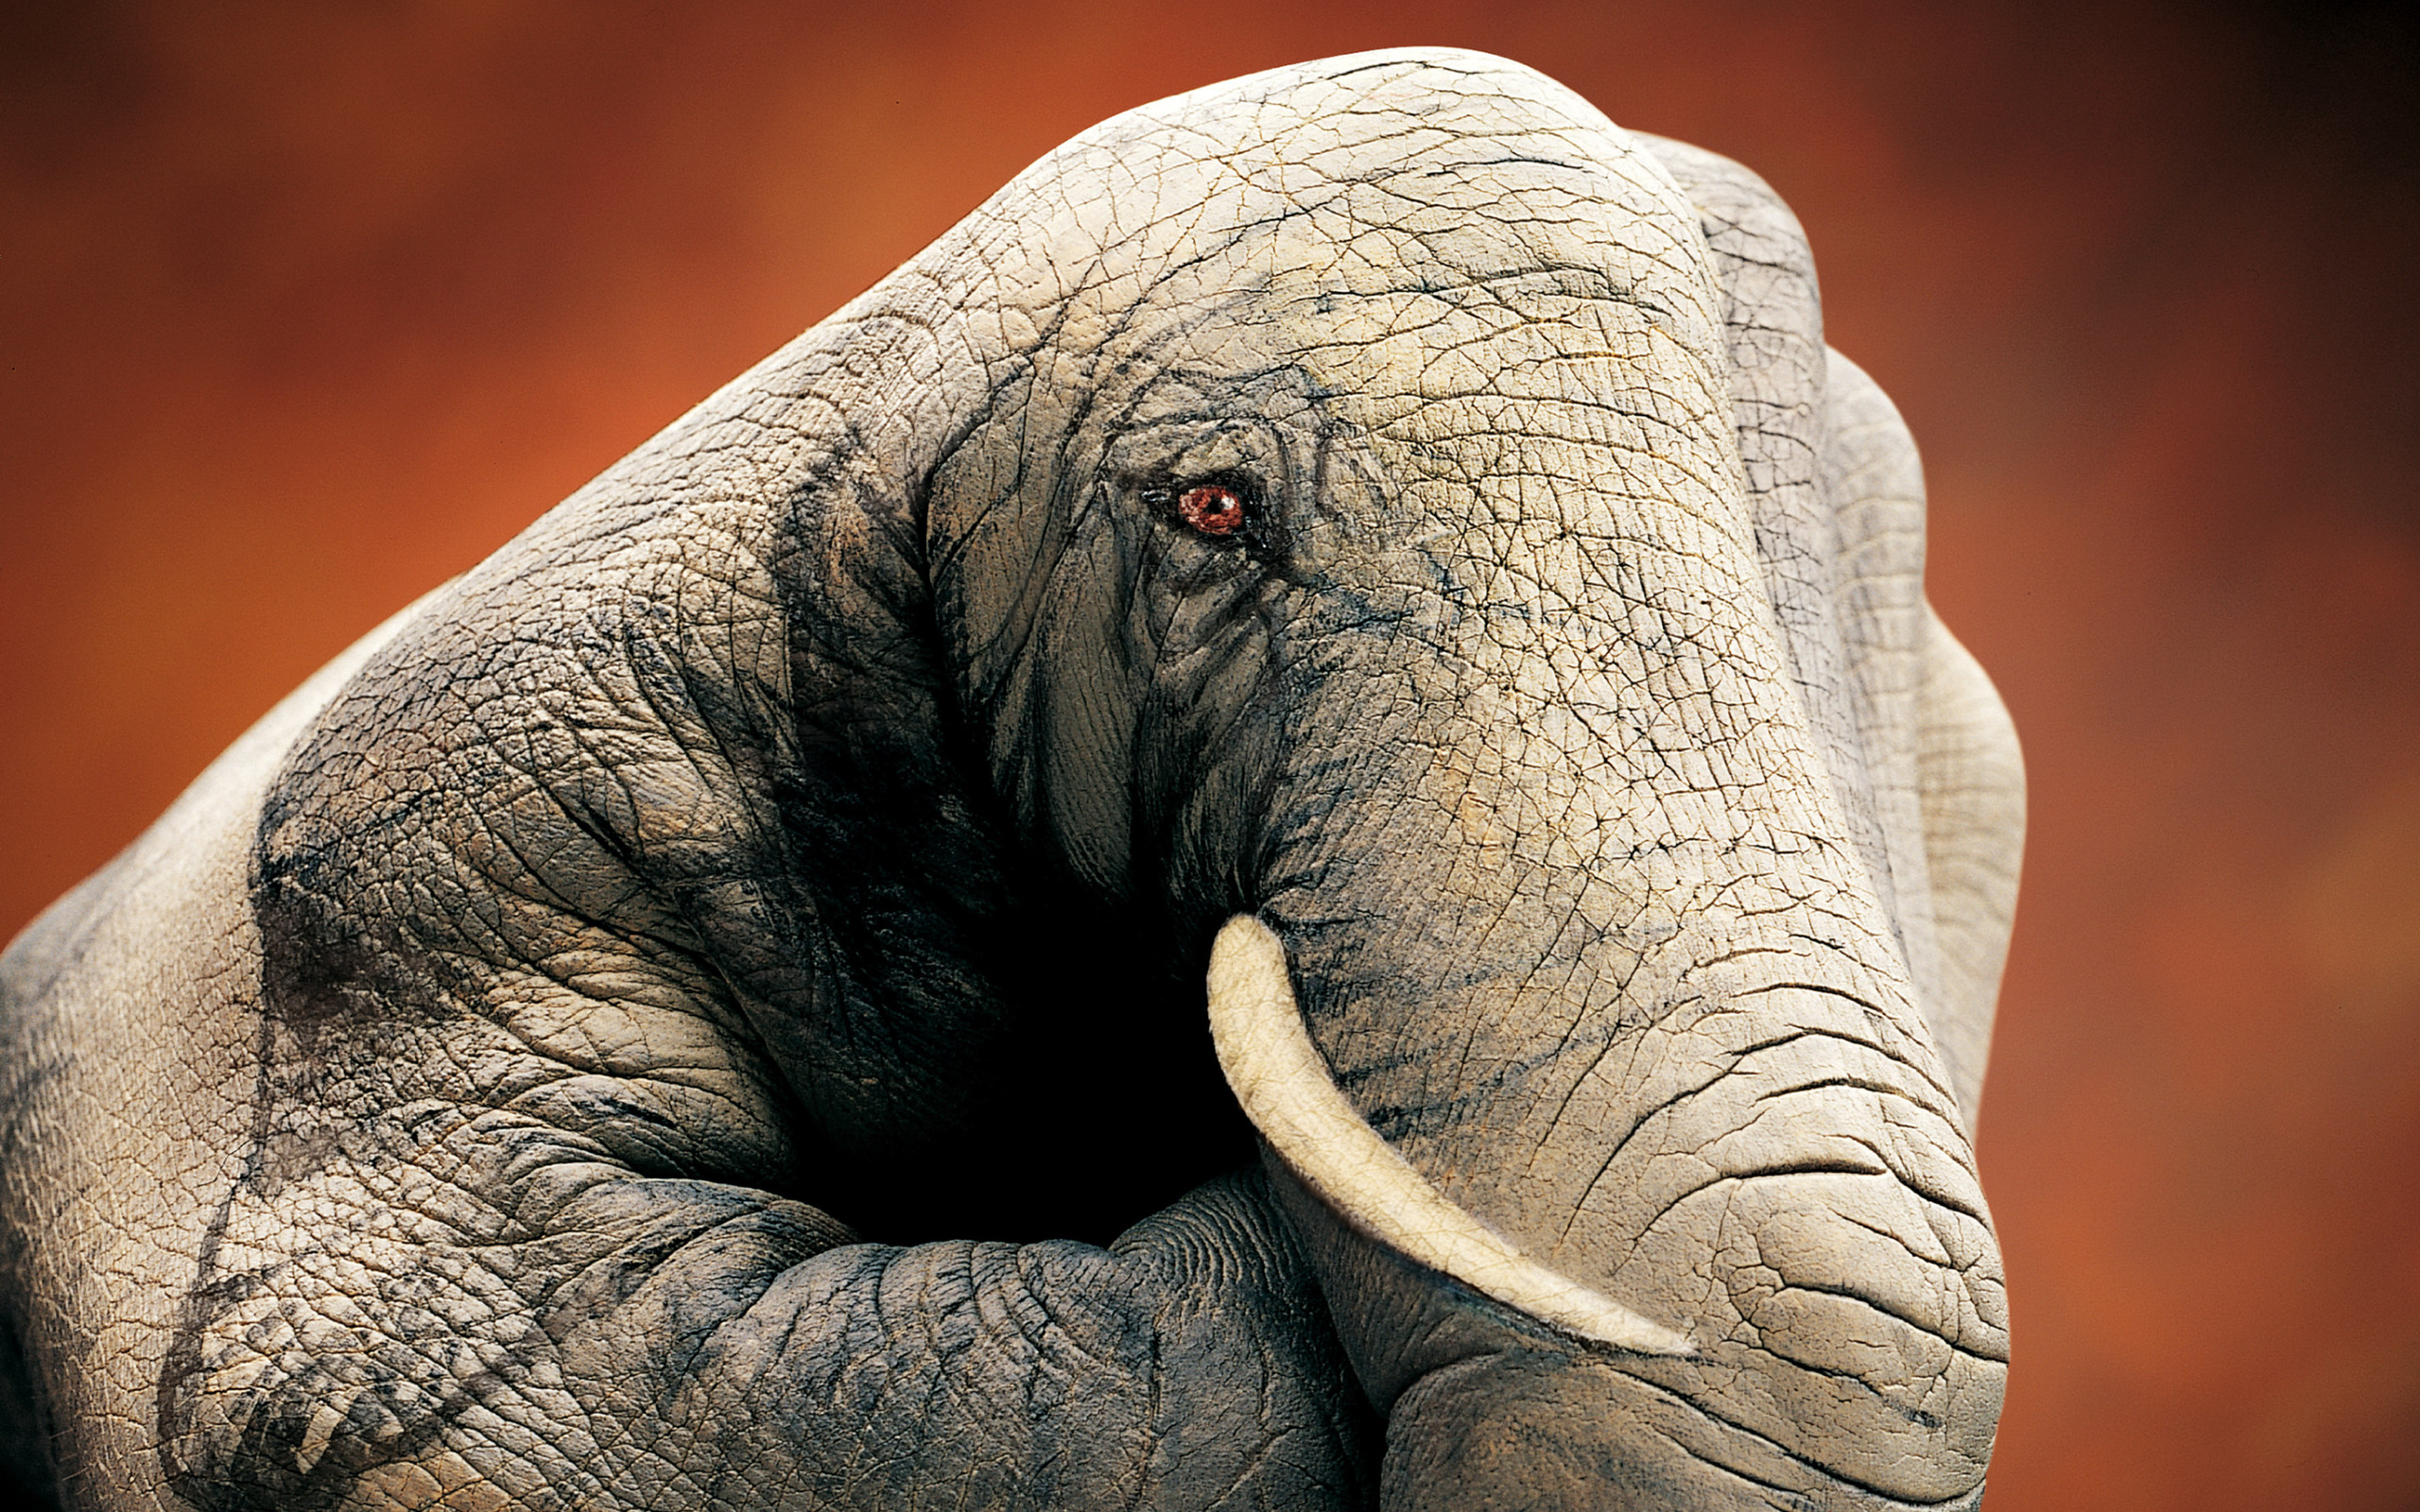 Elephant Hand Wallpaper And Image Pictures Photos